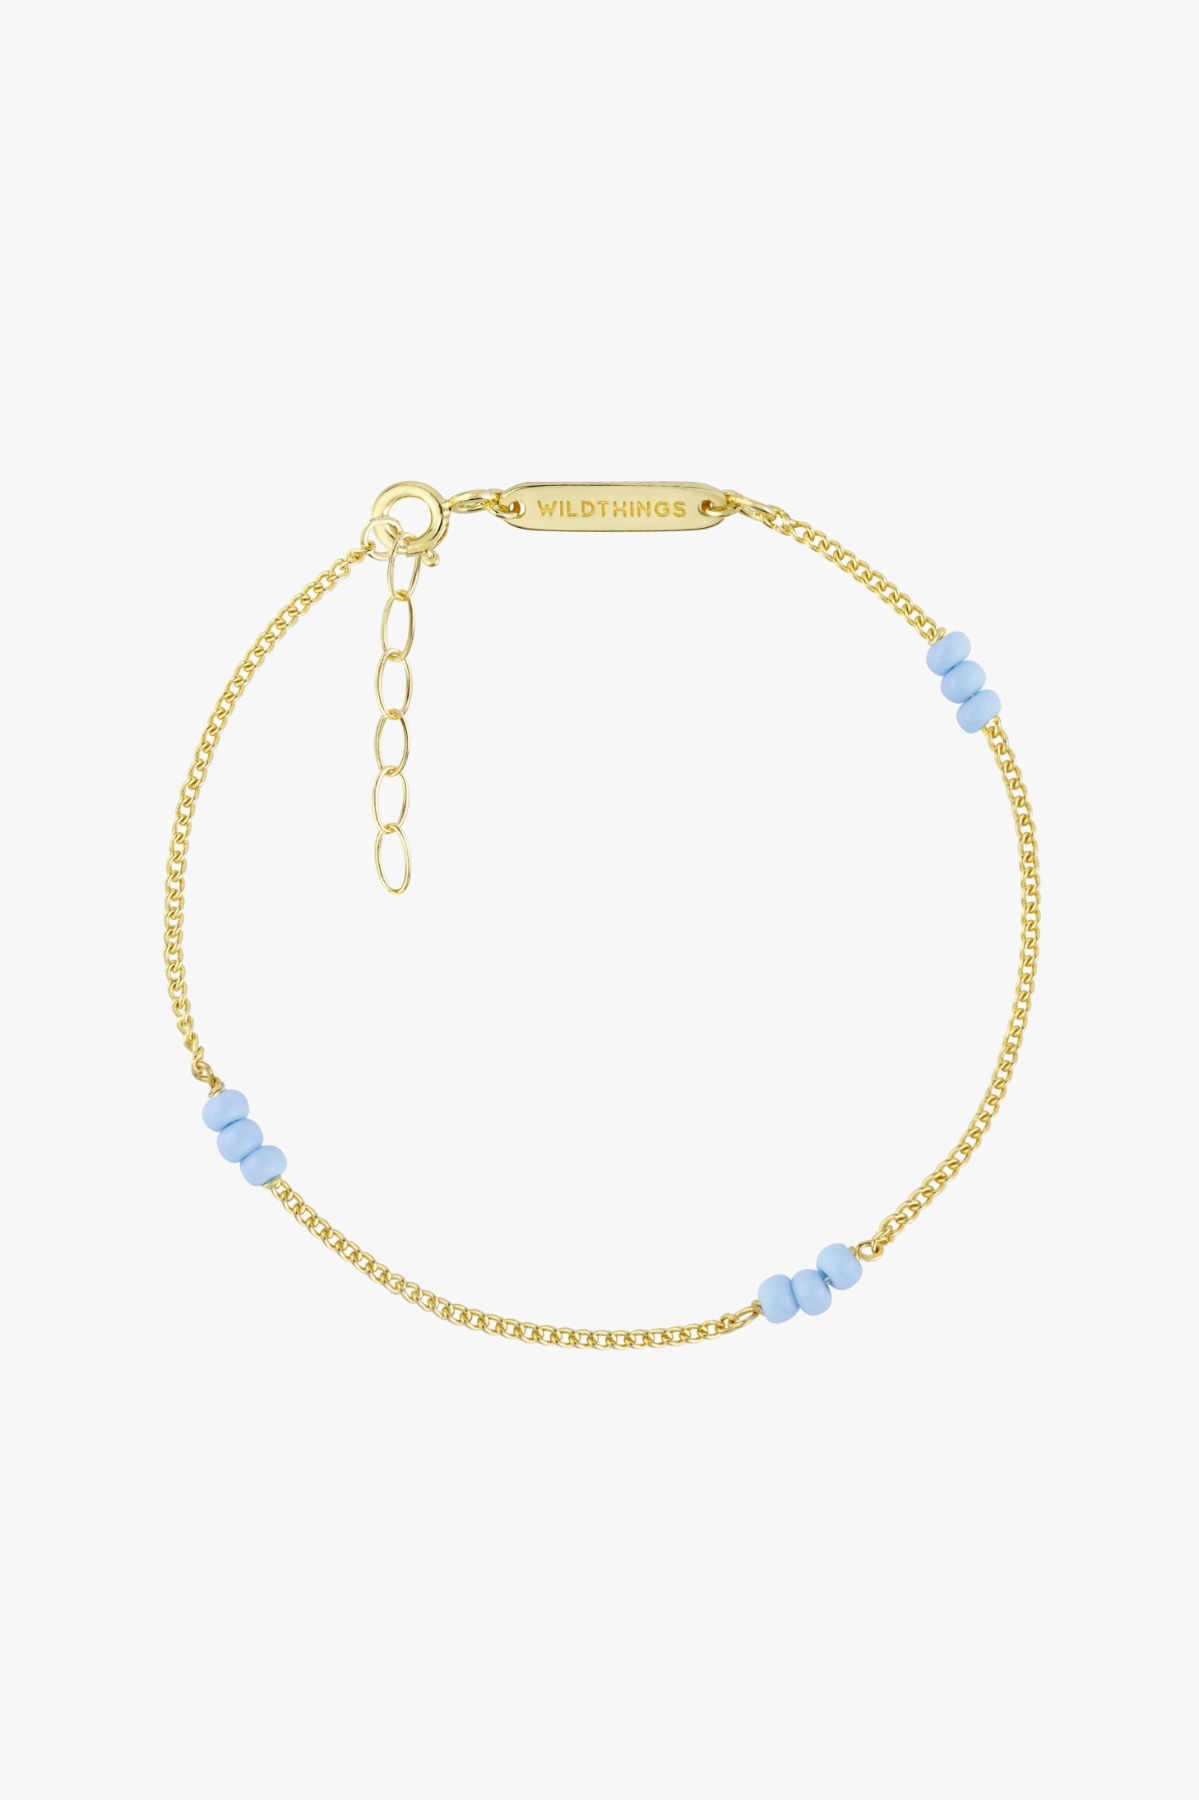 wildthings collectables - Triple blue beads bracelet gold plated